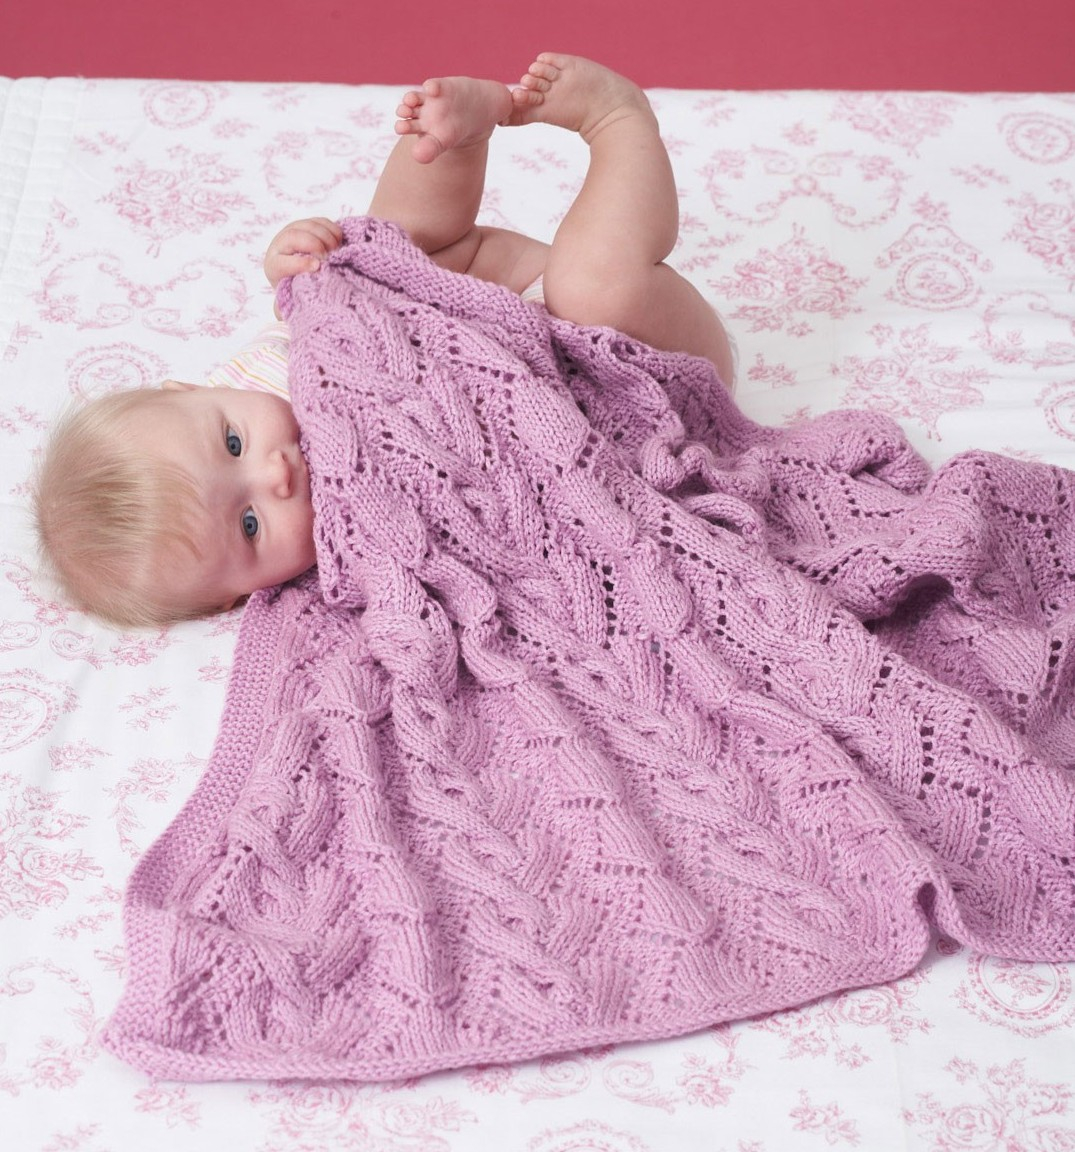 Knitting Patterns For Baby Blankets Free Awww Some Ba Blanket Knitting Patterns In The Loop Knitting